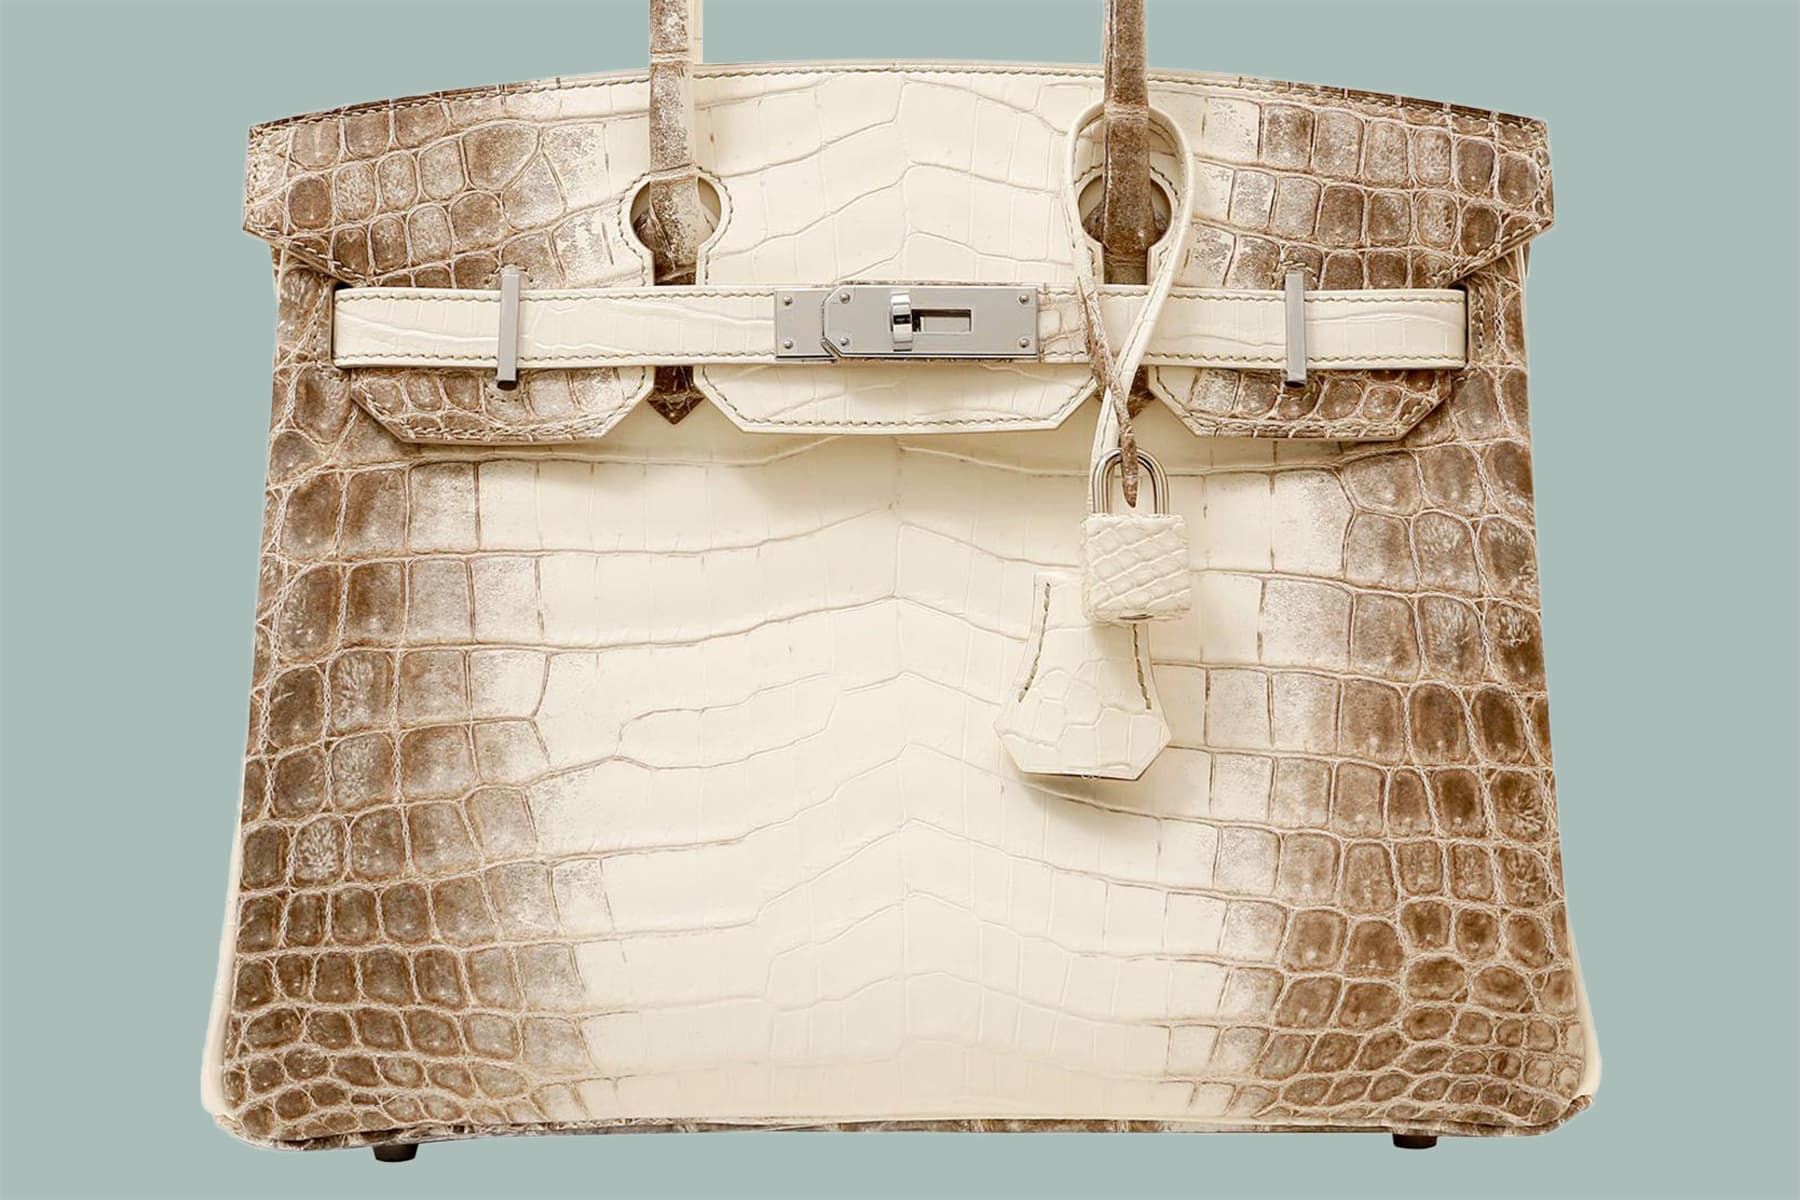 featured image for post: These Custom and Rare Birkin Bags Are a Collector’s Dream